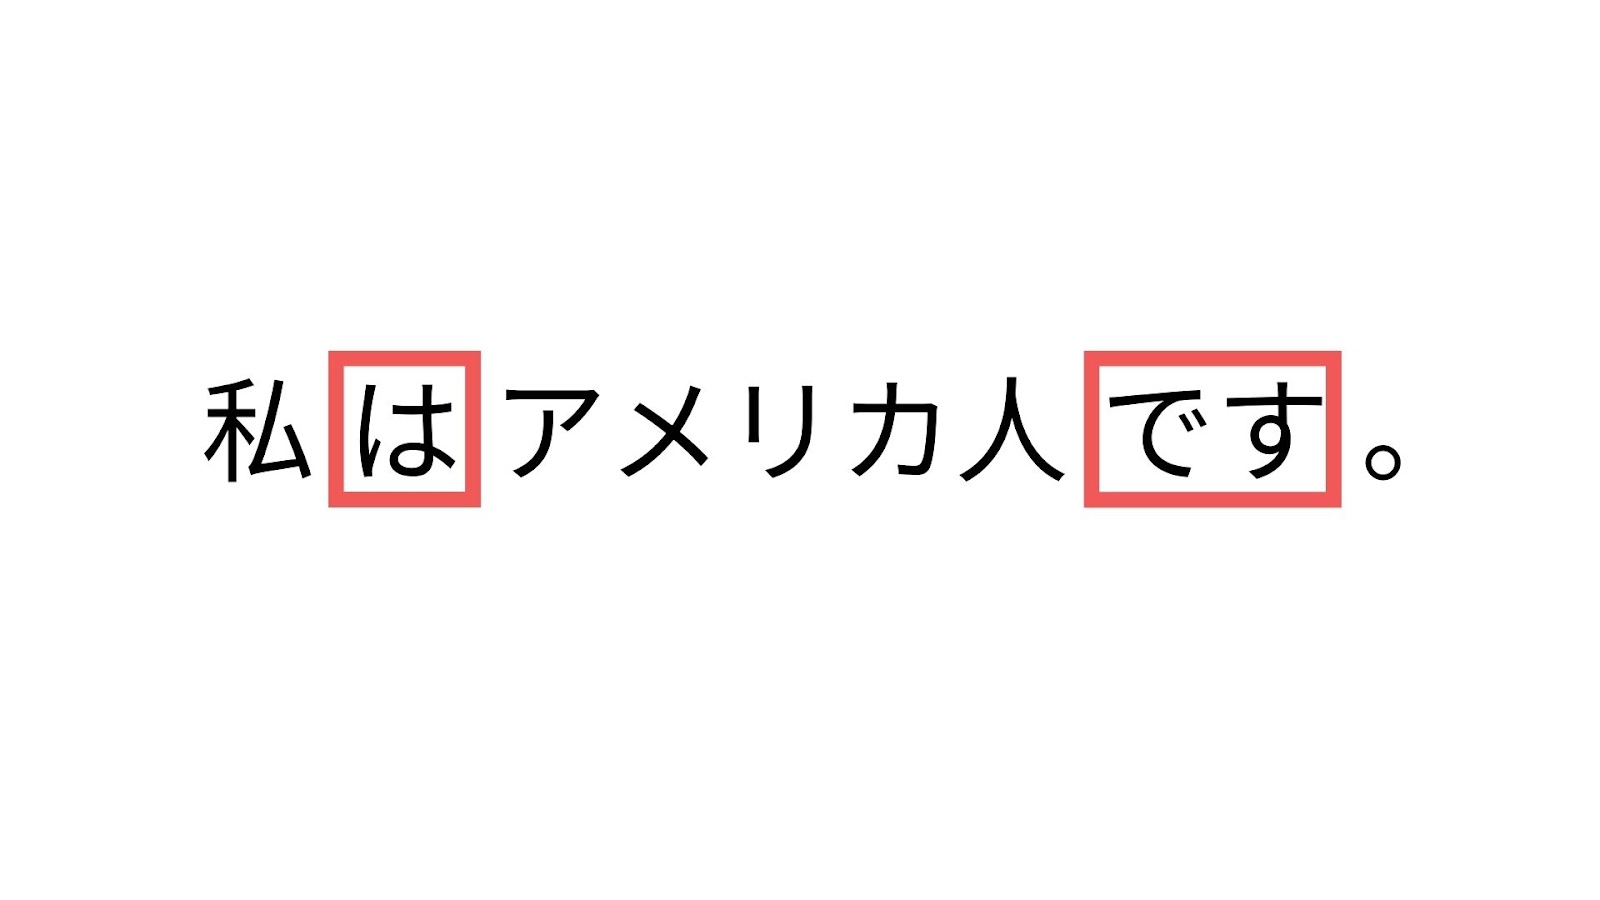 The alphabet は, で and す in the example sentence 私はアメリカ人です are Hiragana alphabet.